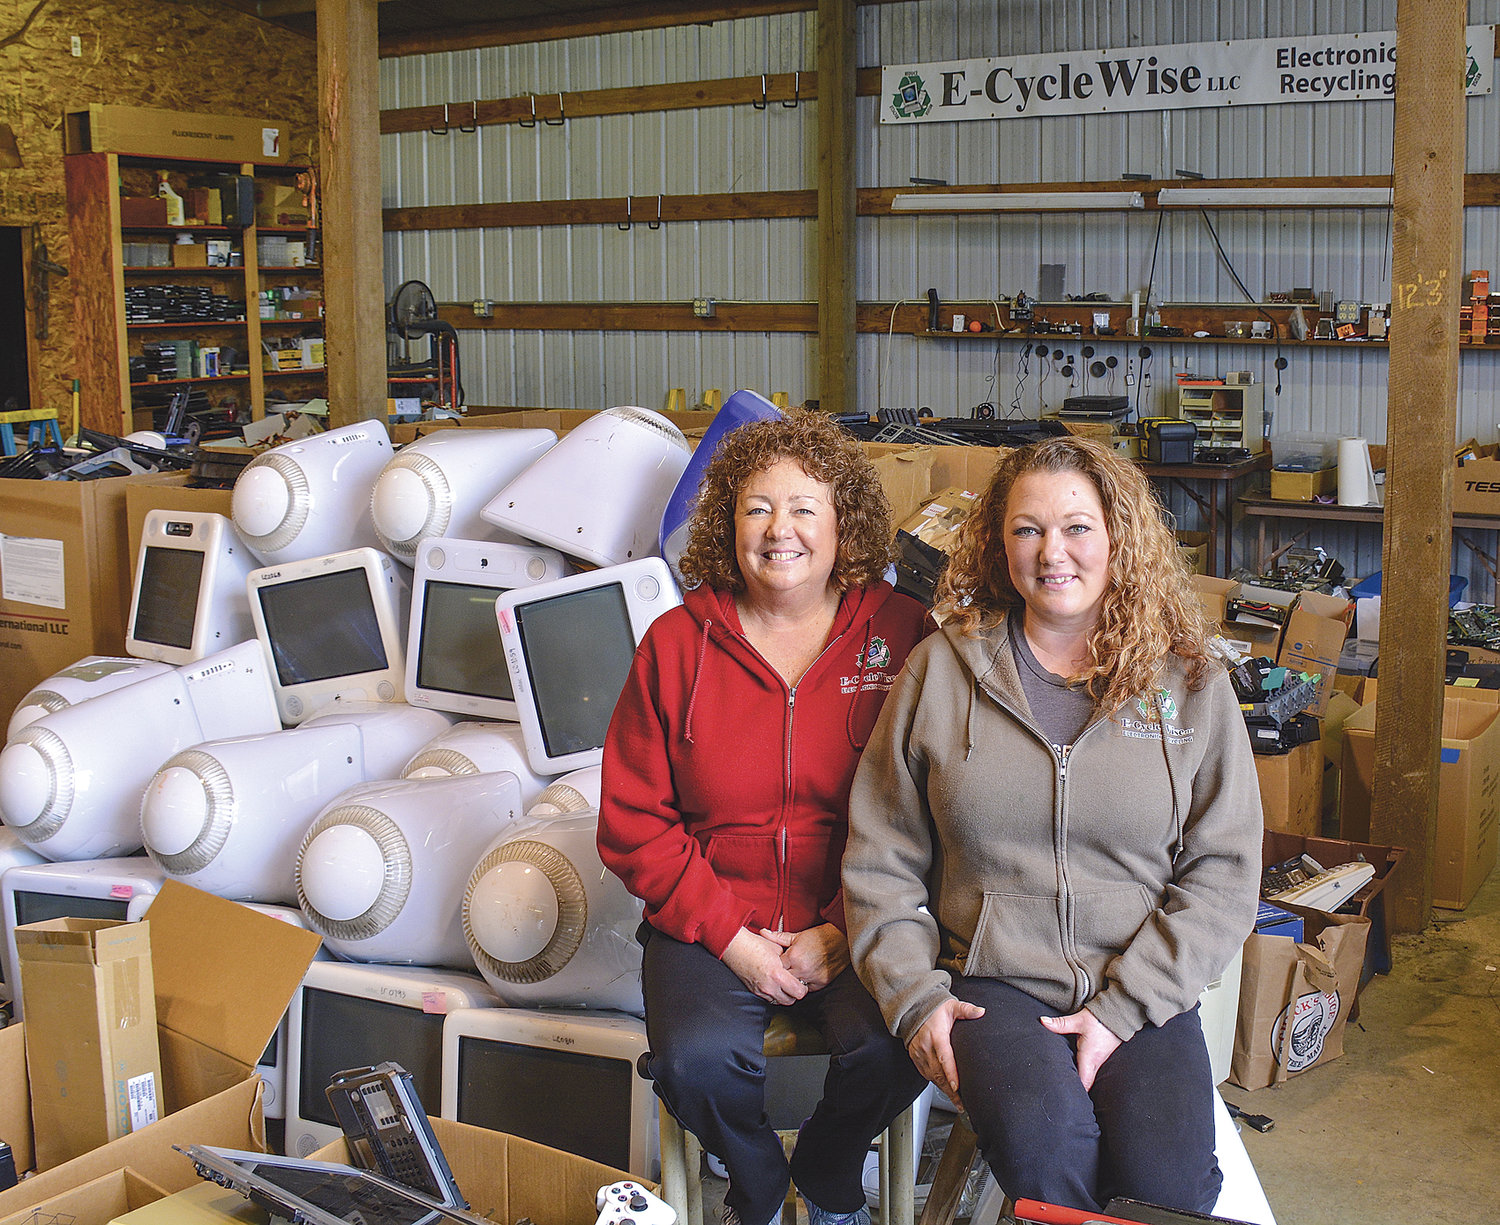 THE MOTHER-DAUGHTER team of Rachel Treasure (left) and Eva Metcalfe is behind the La Center-based business, E-CycleWise, which offers free pickups, recycling and data destruction for individuals and businesses that want to get rid of their old electronic devices.